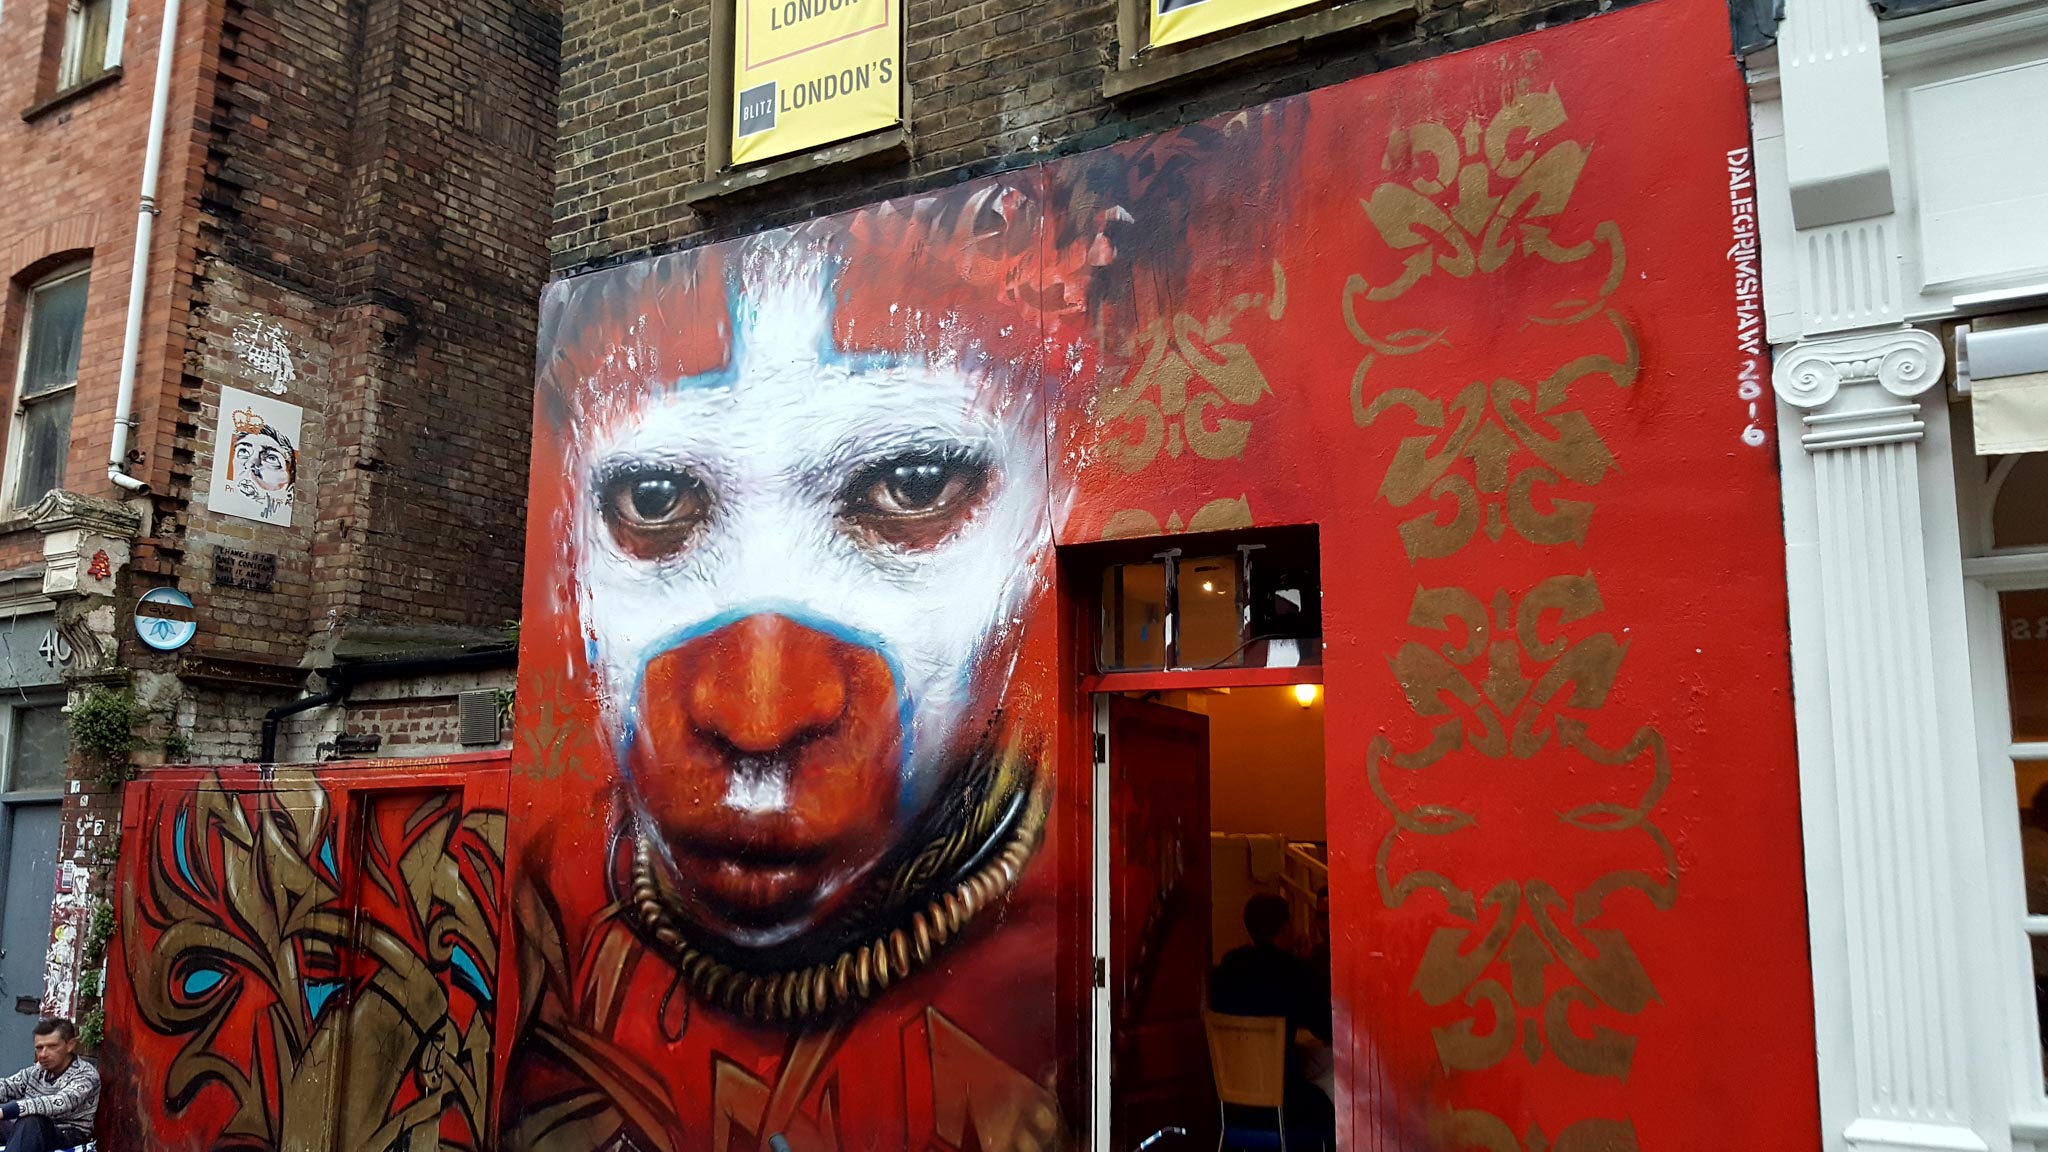 wariior with war paint by Dale Grimshaw in London, Eastend.